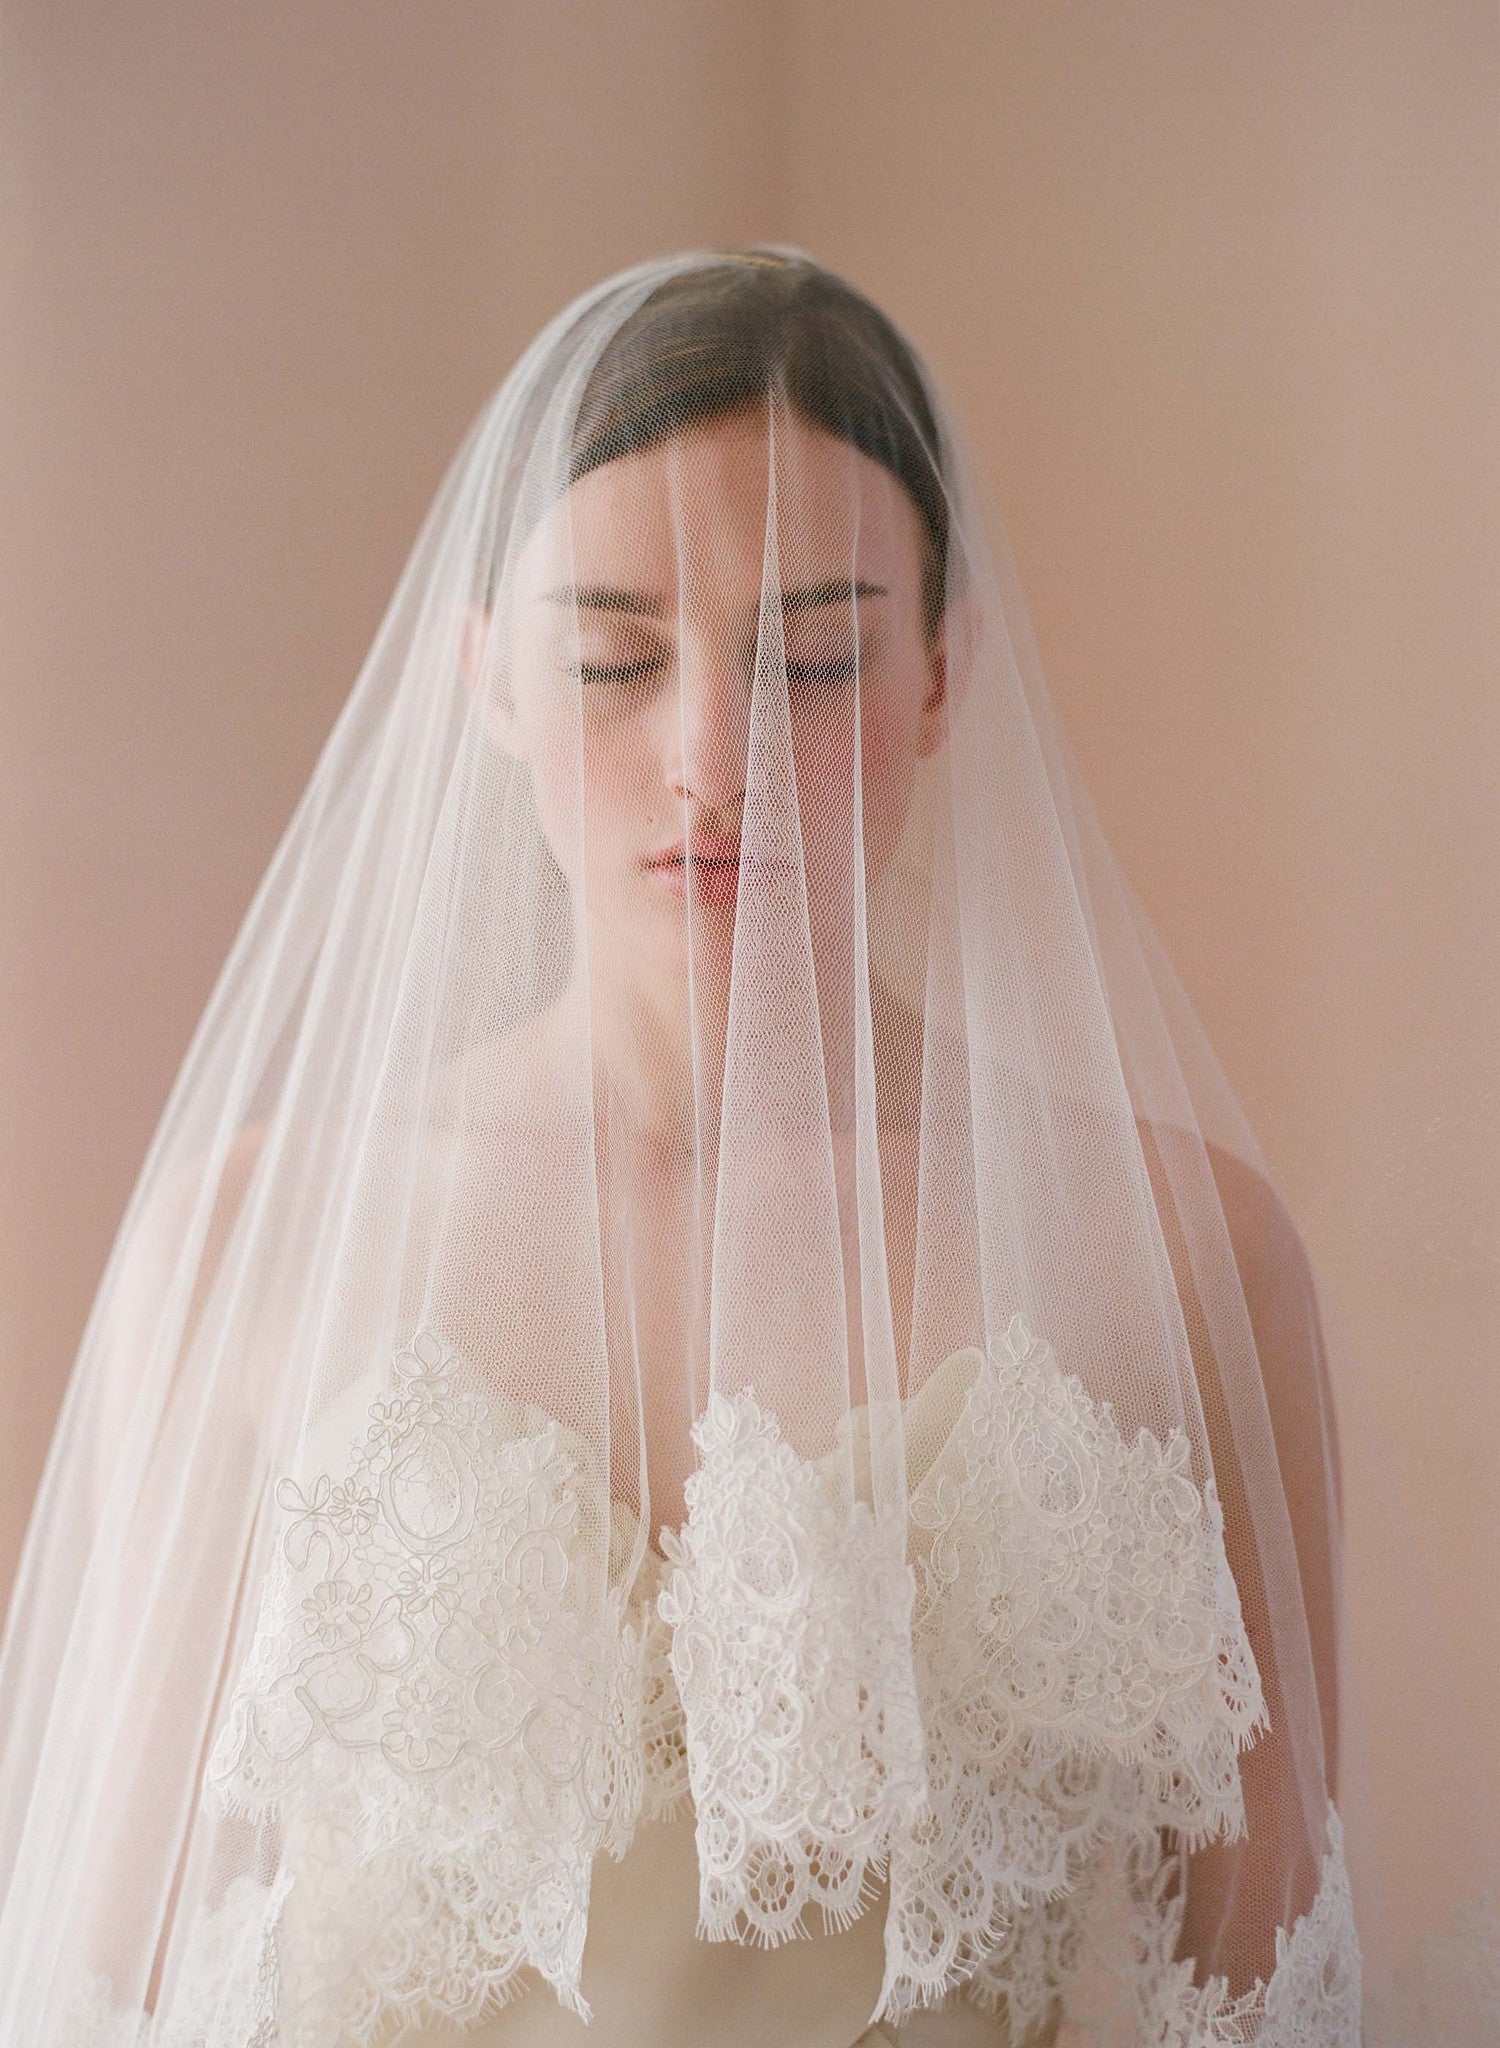 CATHEDRAL ALENCON LACE VEIL IN TWO TIER WITH BLUSHER, TWO LAYERS